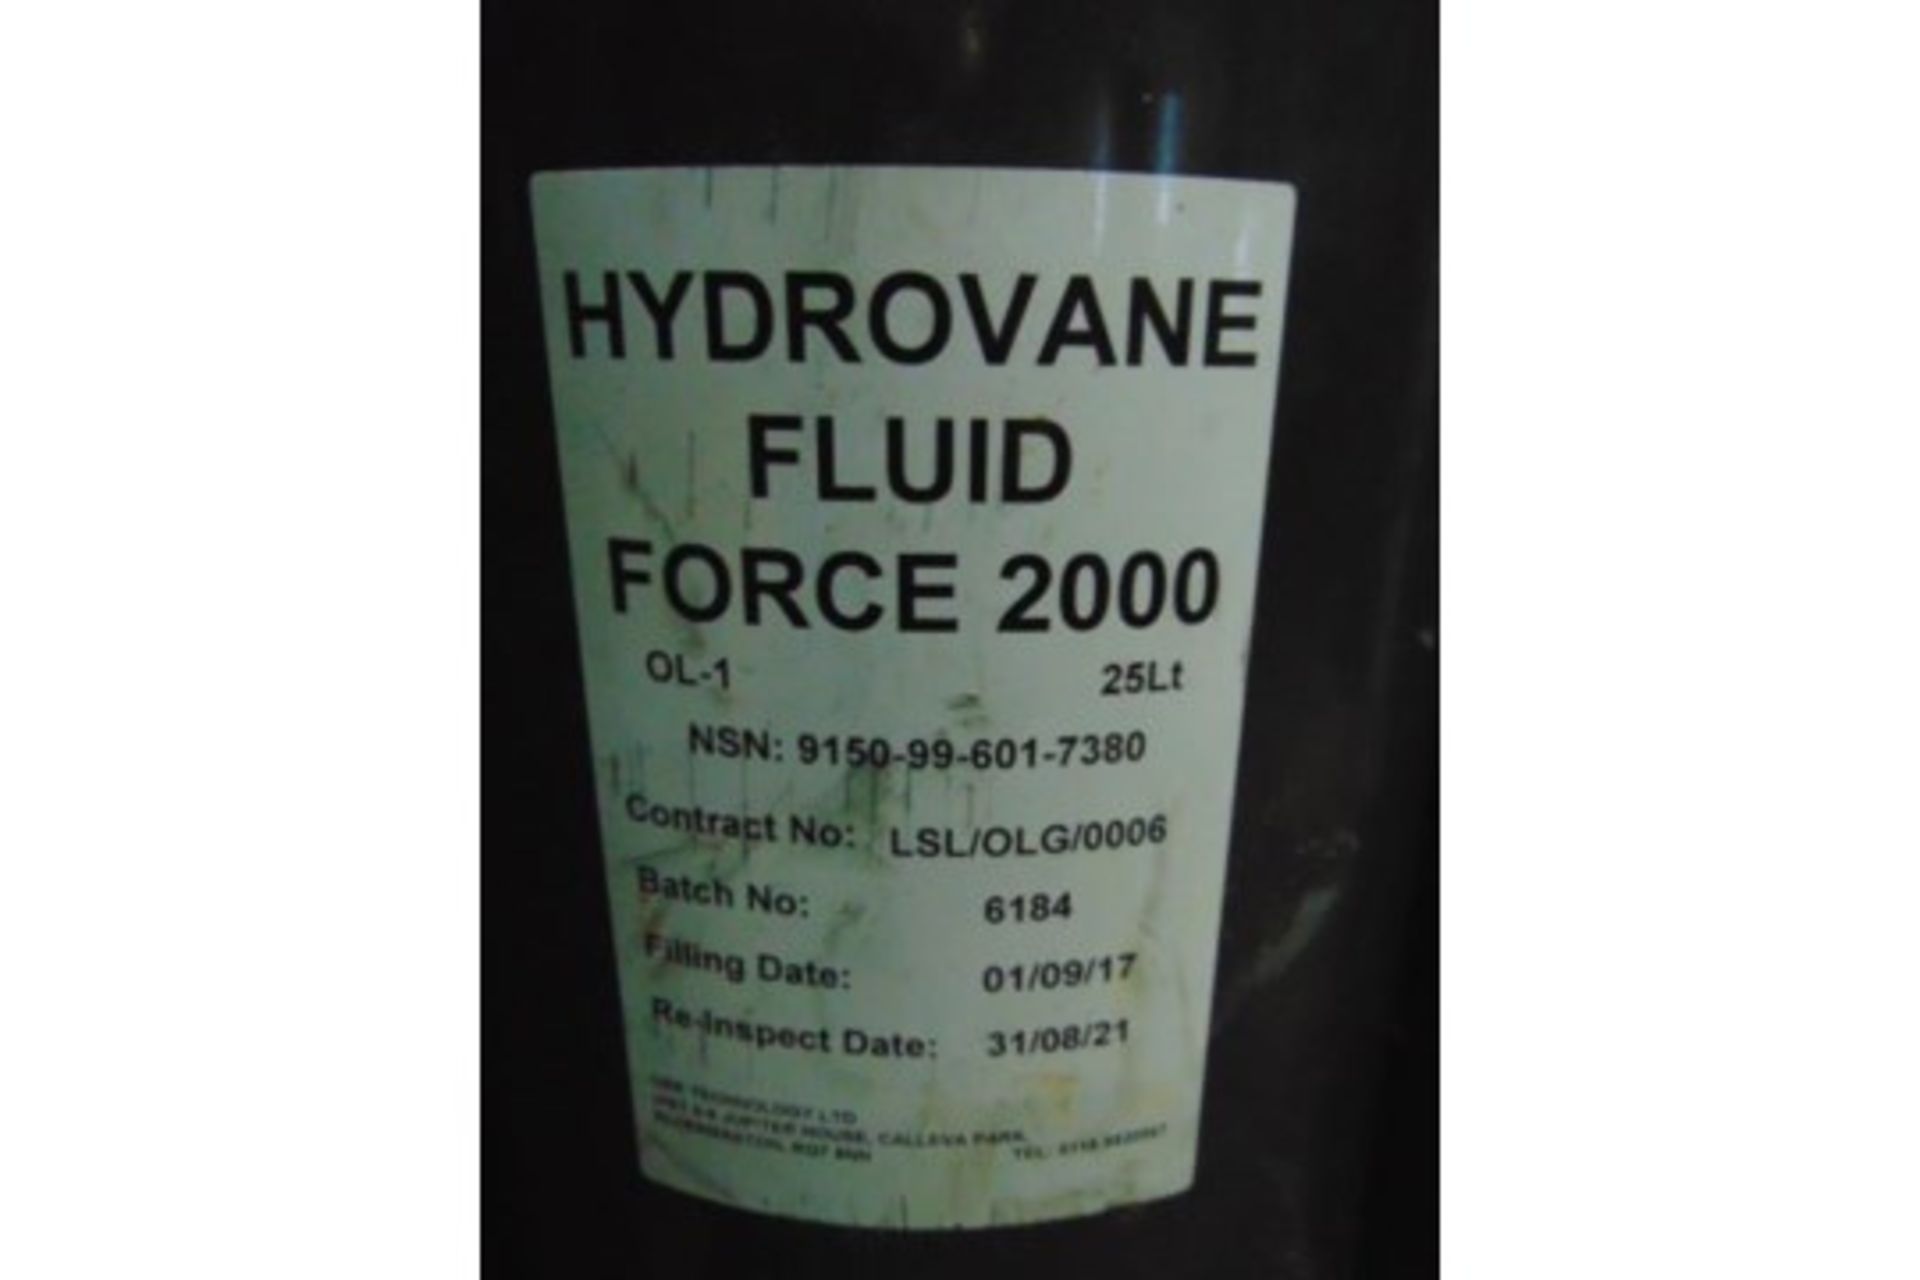 10 x 25 Ltr Hydrovane Fluid Force 2000 - Image 2 of 2